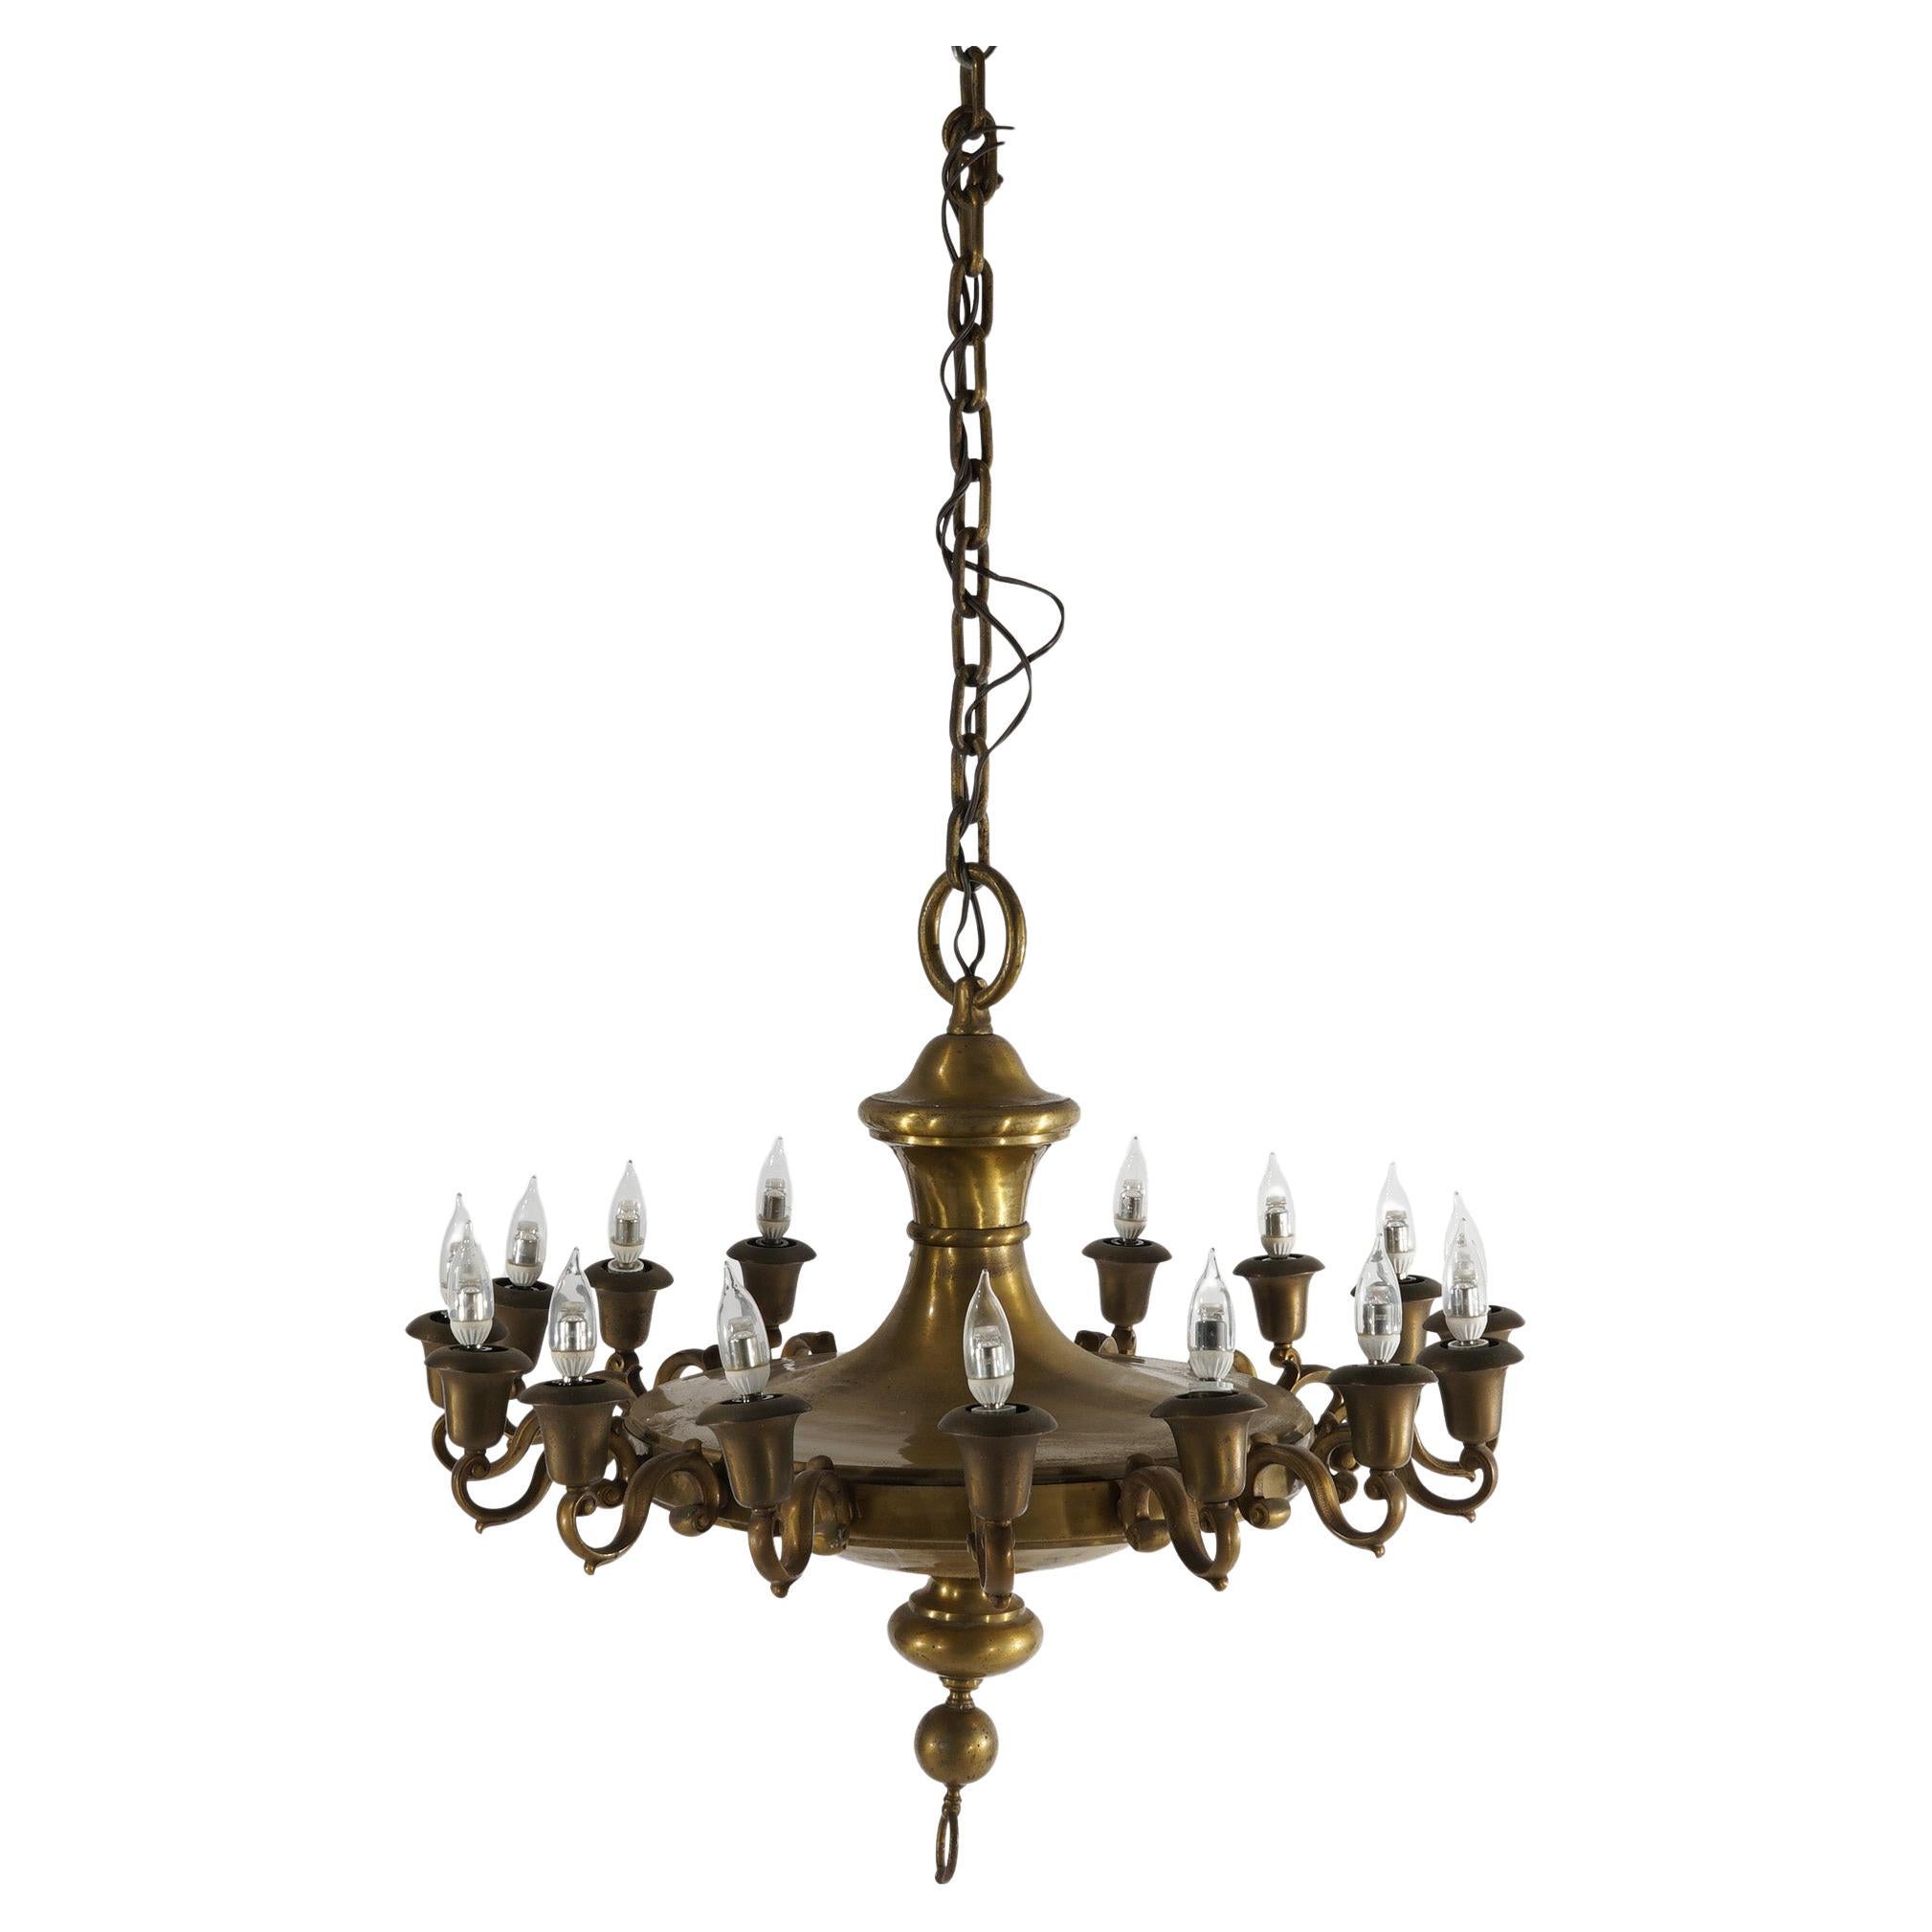 Antique Oversized French Empire Style Brass  16-Light Pan Chandelier, 20th C For Sale